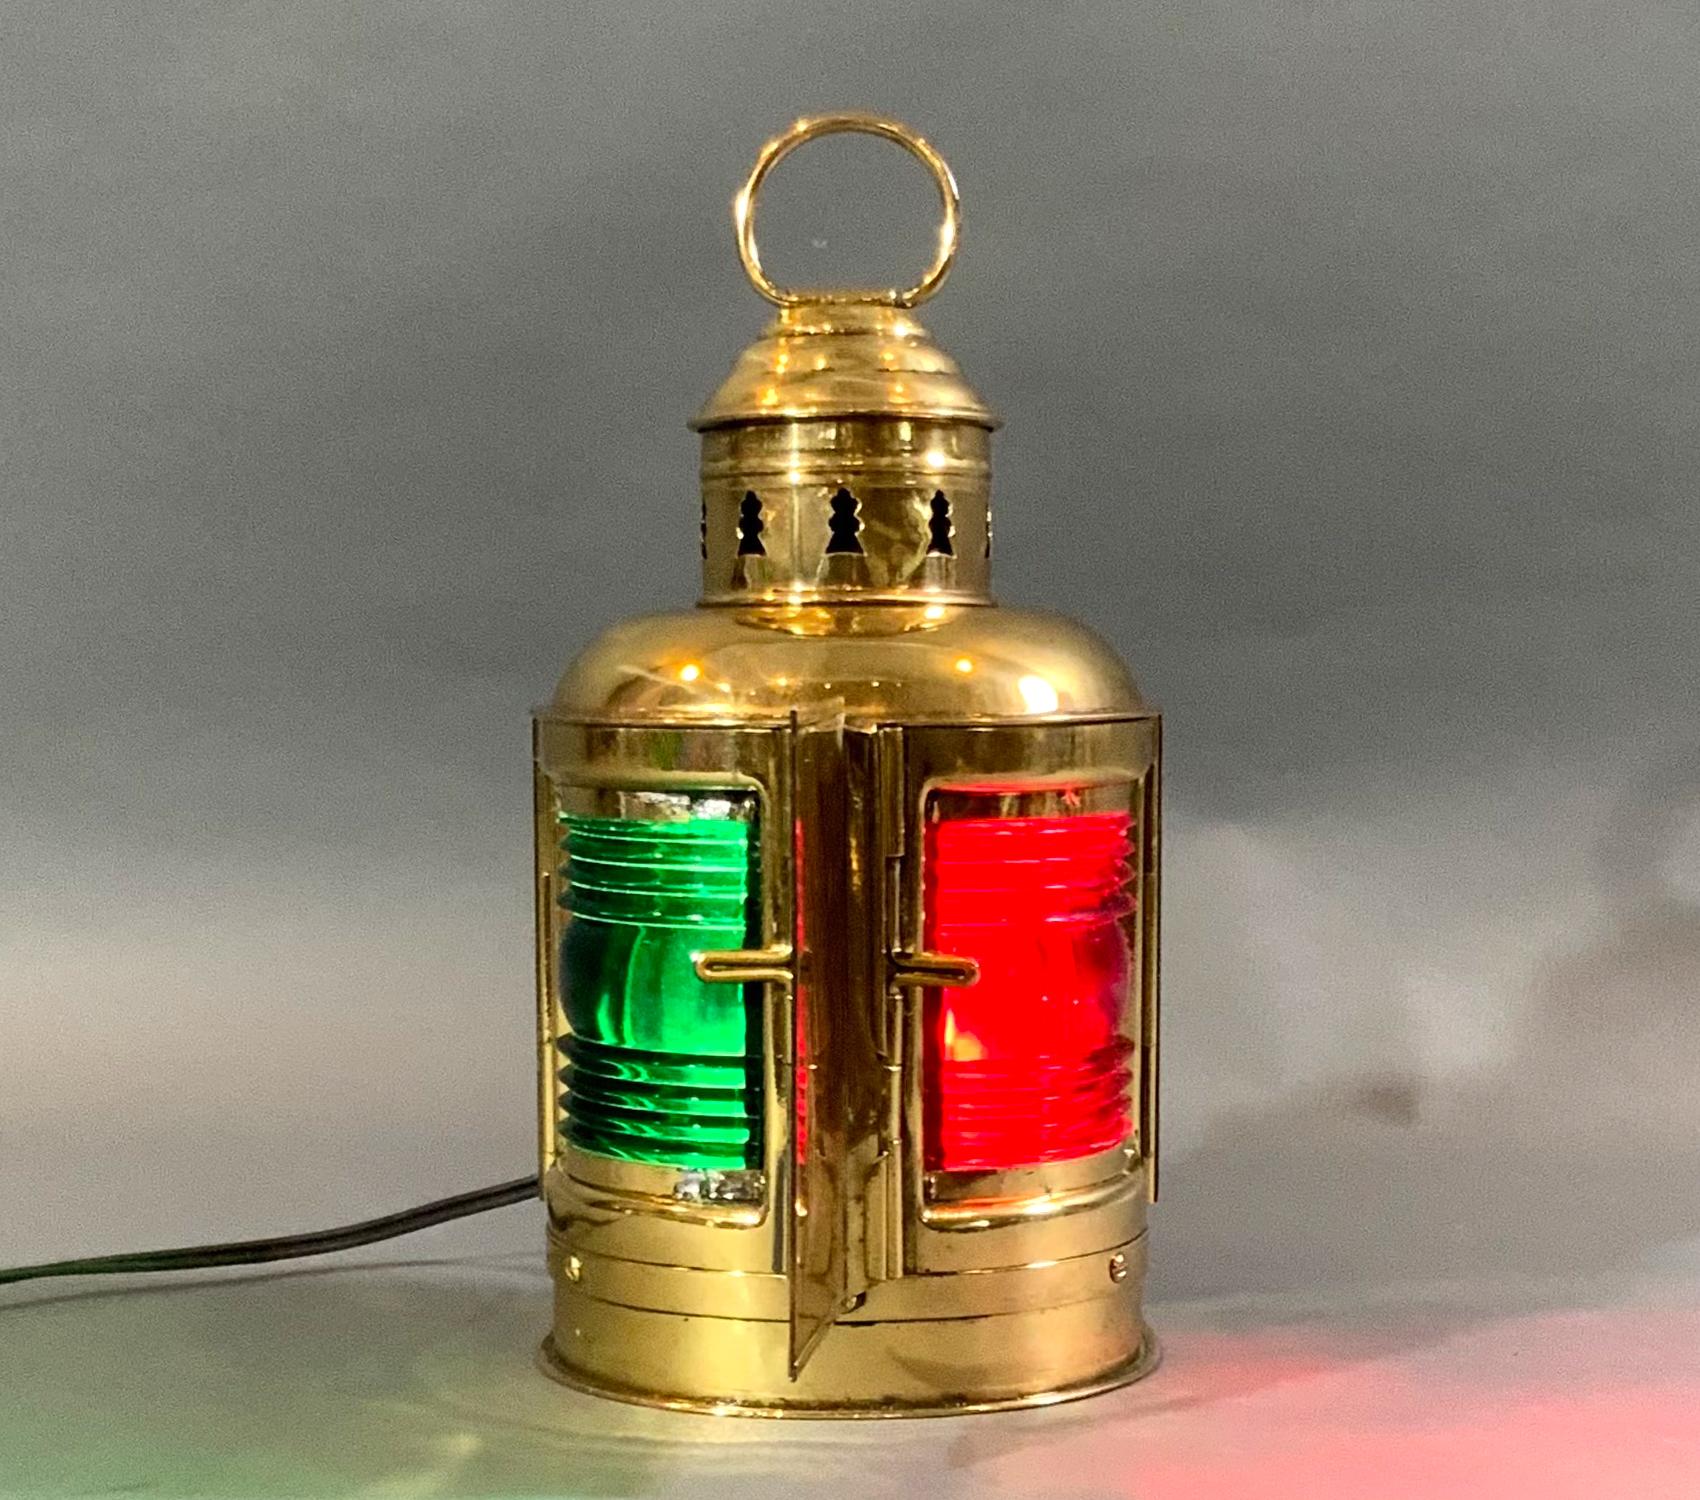 Highly polished and lacquered nautical boat lantern by Perko of Brooklyn NY. With mounting flange, vented chimney, and original brass ring. Also has the rarely found center vane of solid brass. Meticulously polished and lacquered, then rewired for